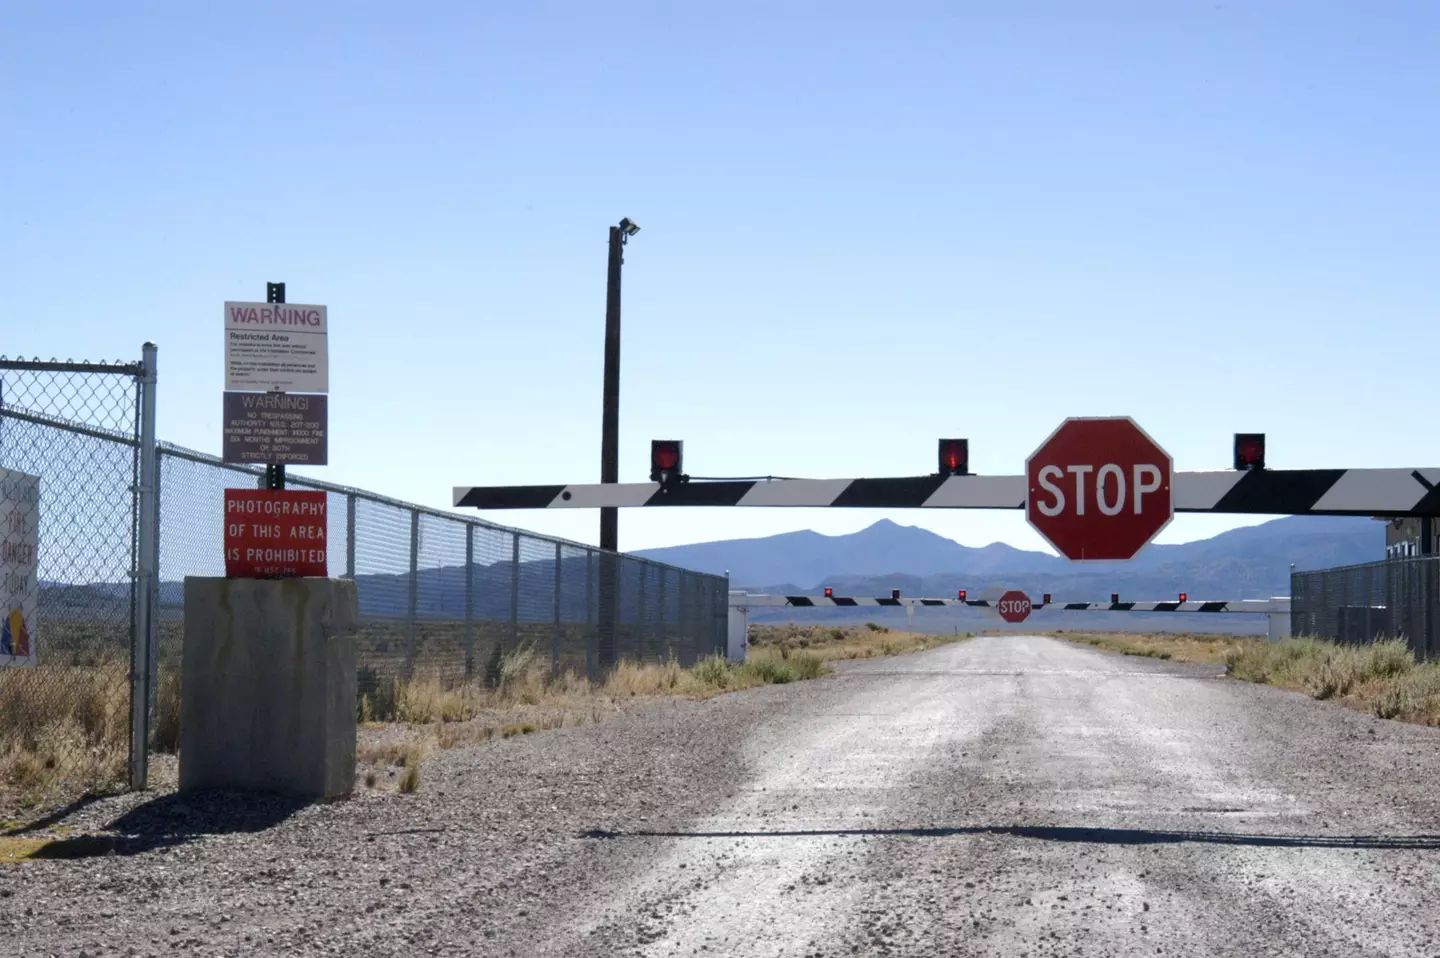 It's probably not the best idea to try and break into Area 51.